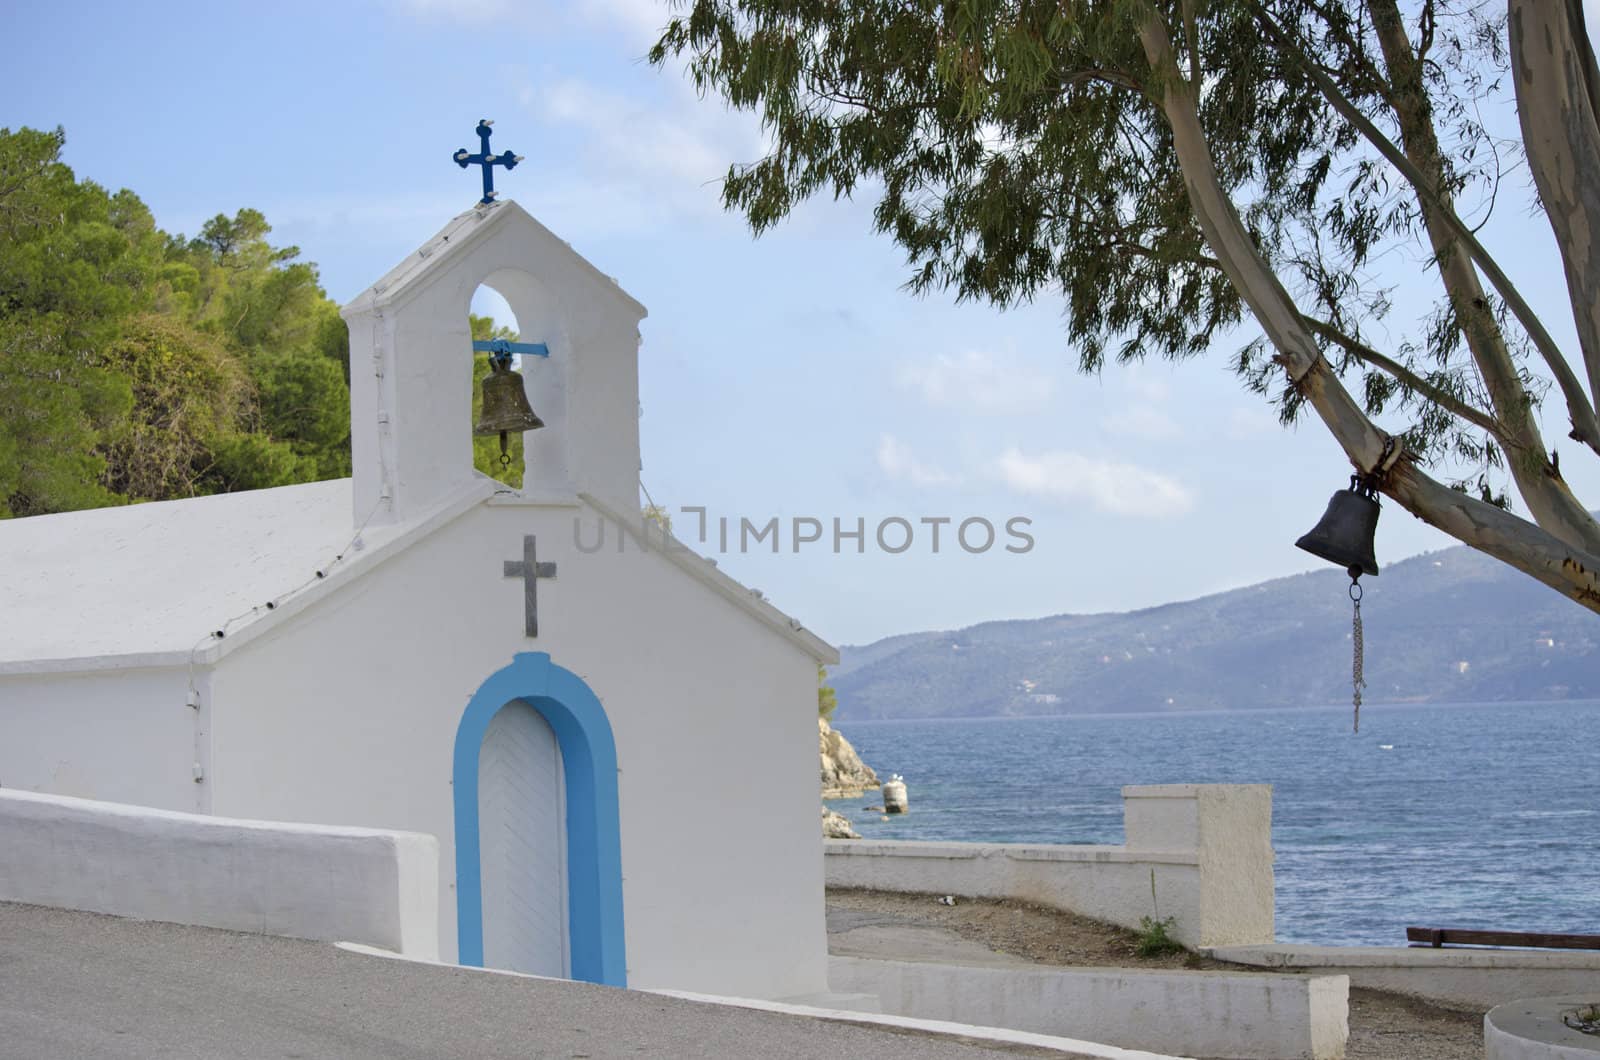 A little white chapel on the island Poros in Greece. The Peleponnese peninsula can be seen in the background.